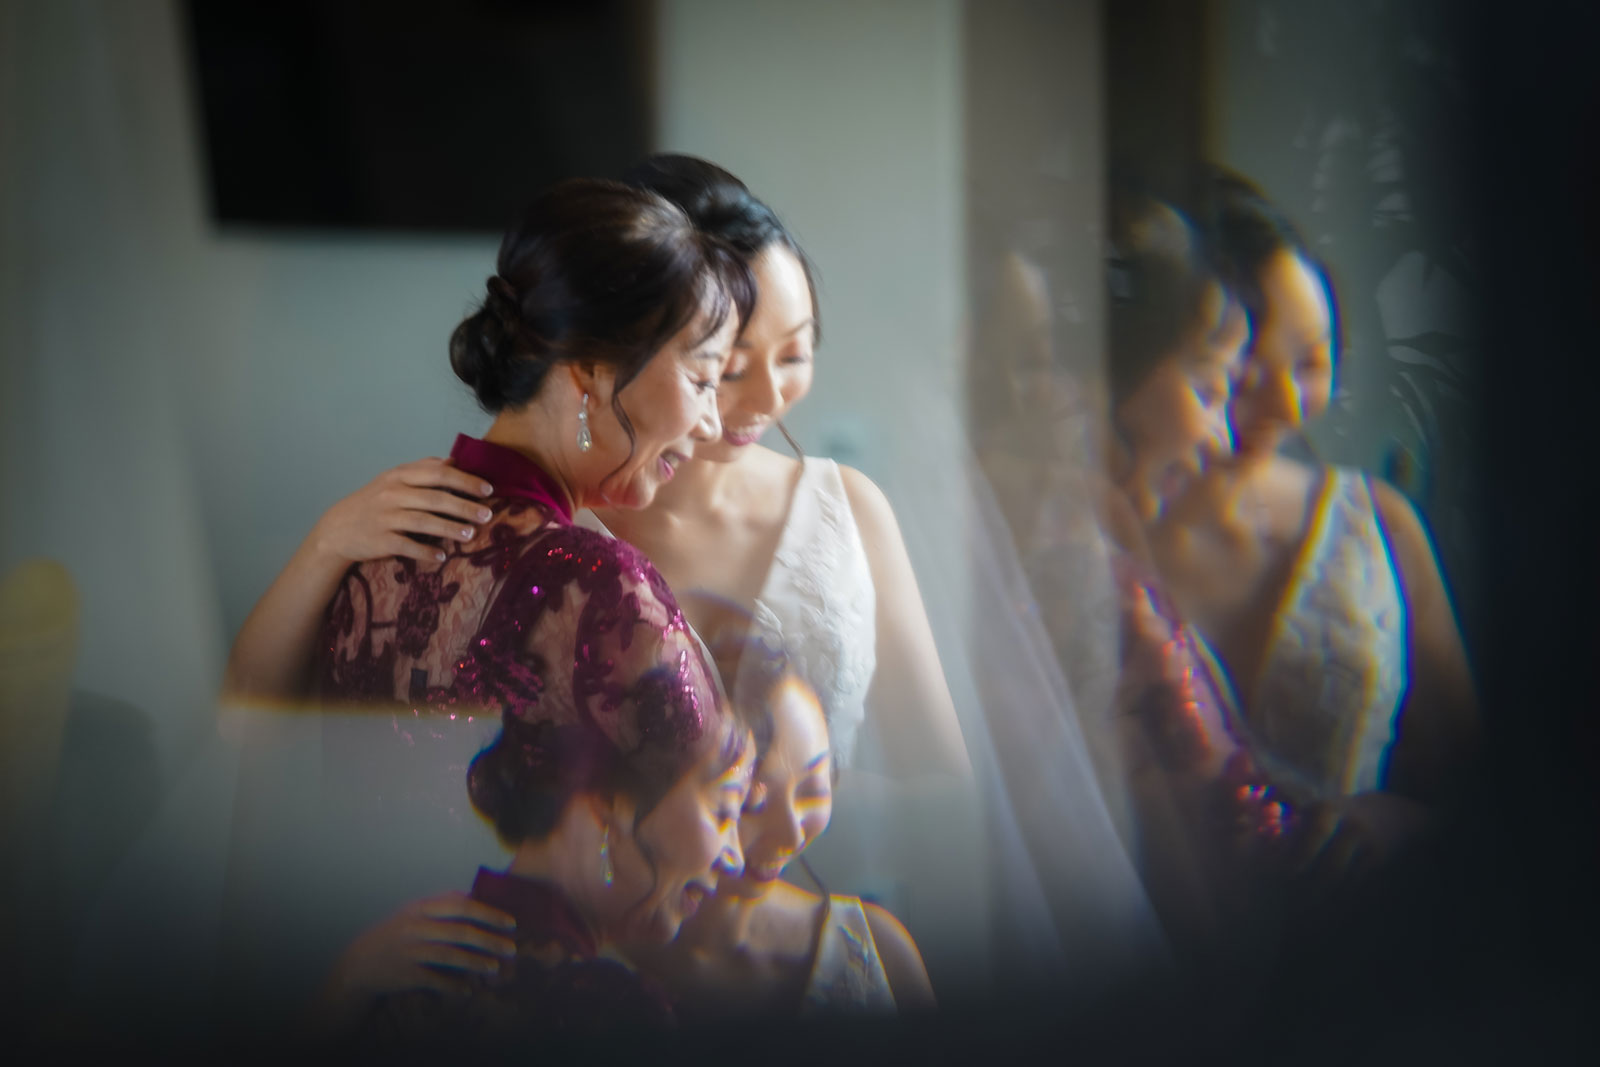 ThomasKim Photography Los Angeles Wedding Photographer Two multicultural brides hugging each other in front of a mirror, celebrating diversity in Los Angeles.